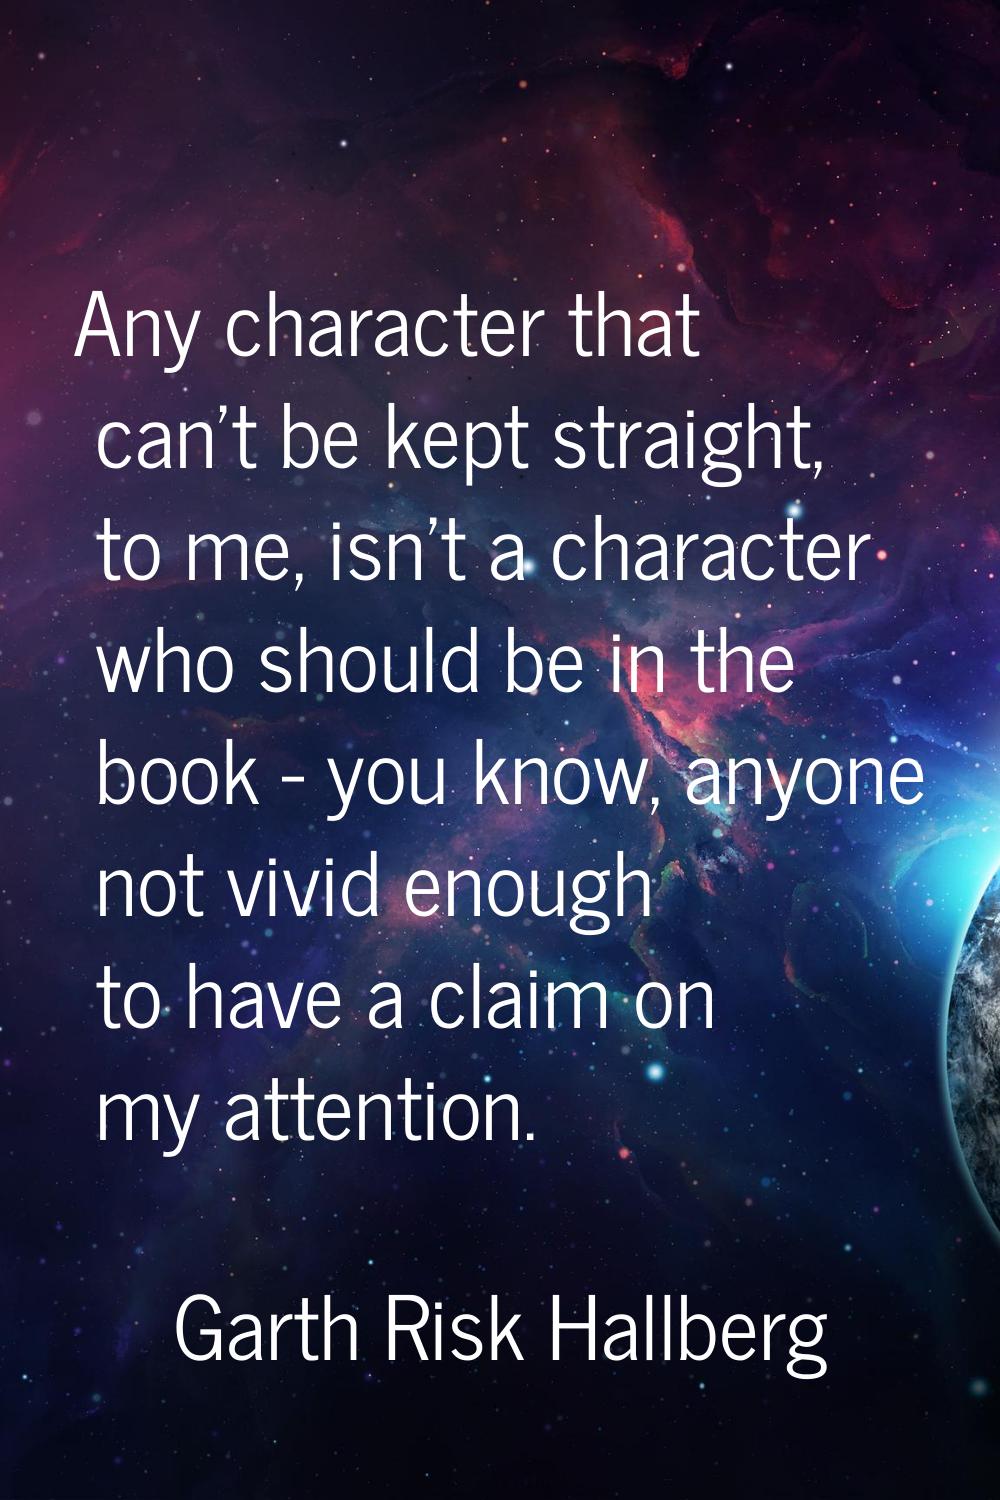 Any character that can't be kept straight, to me, isn't a character who should be in the book - you